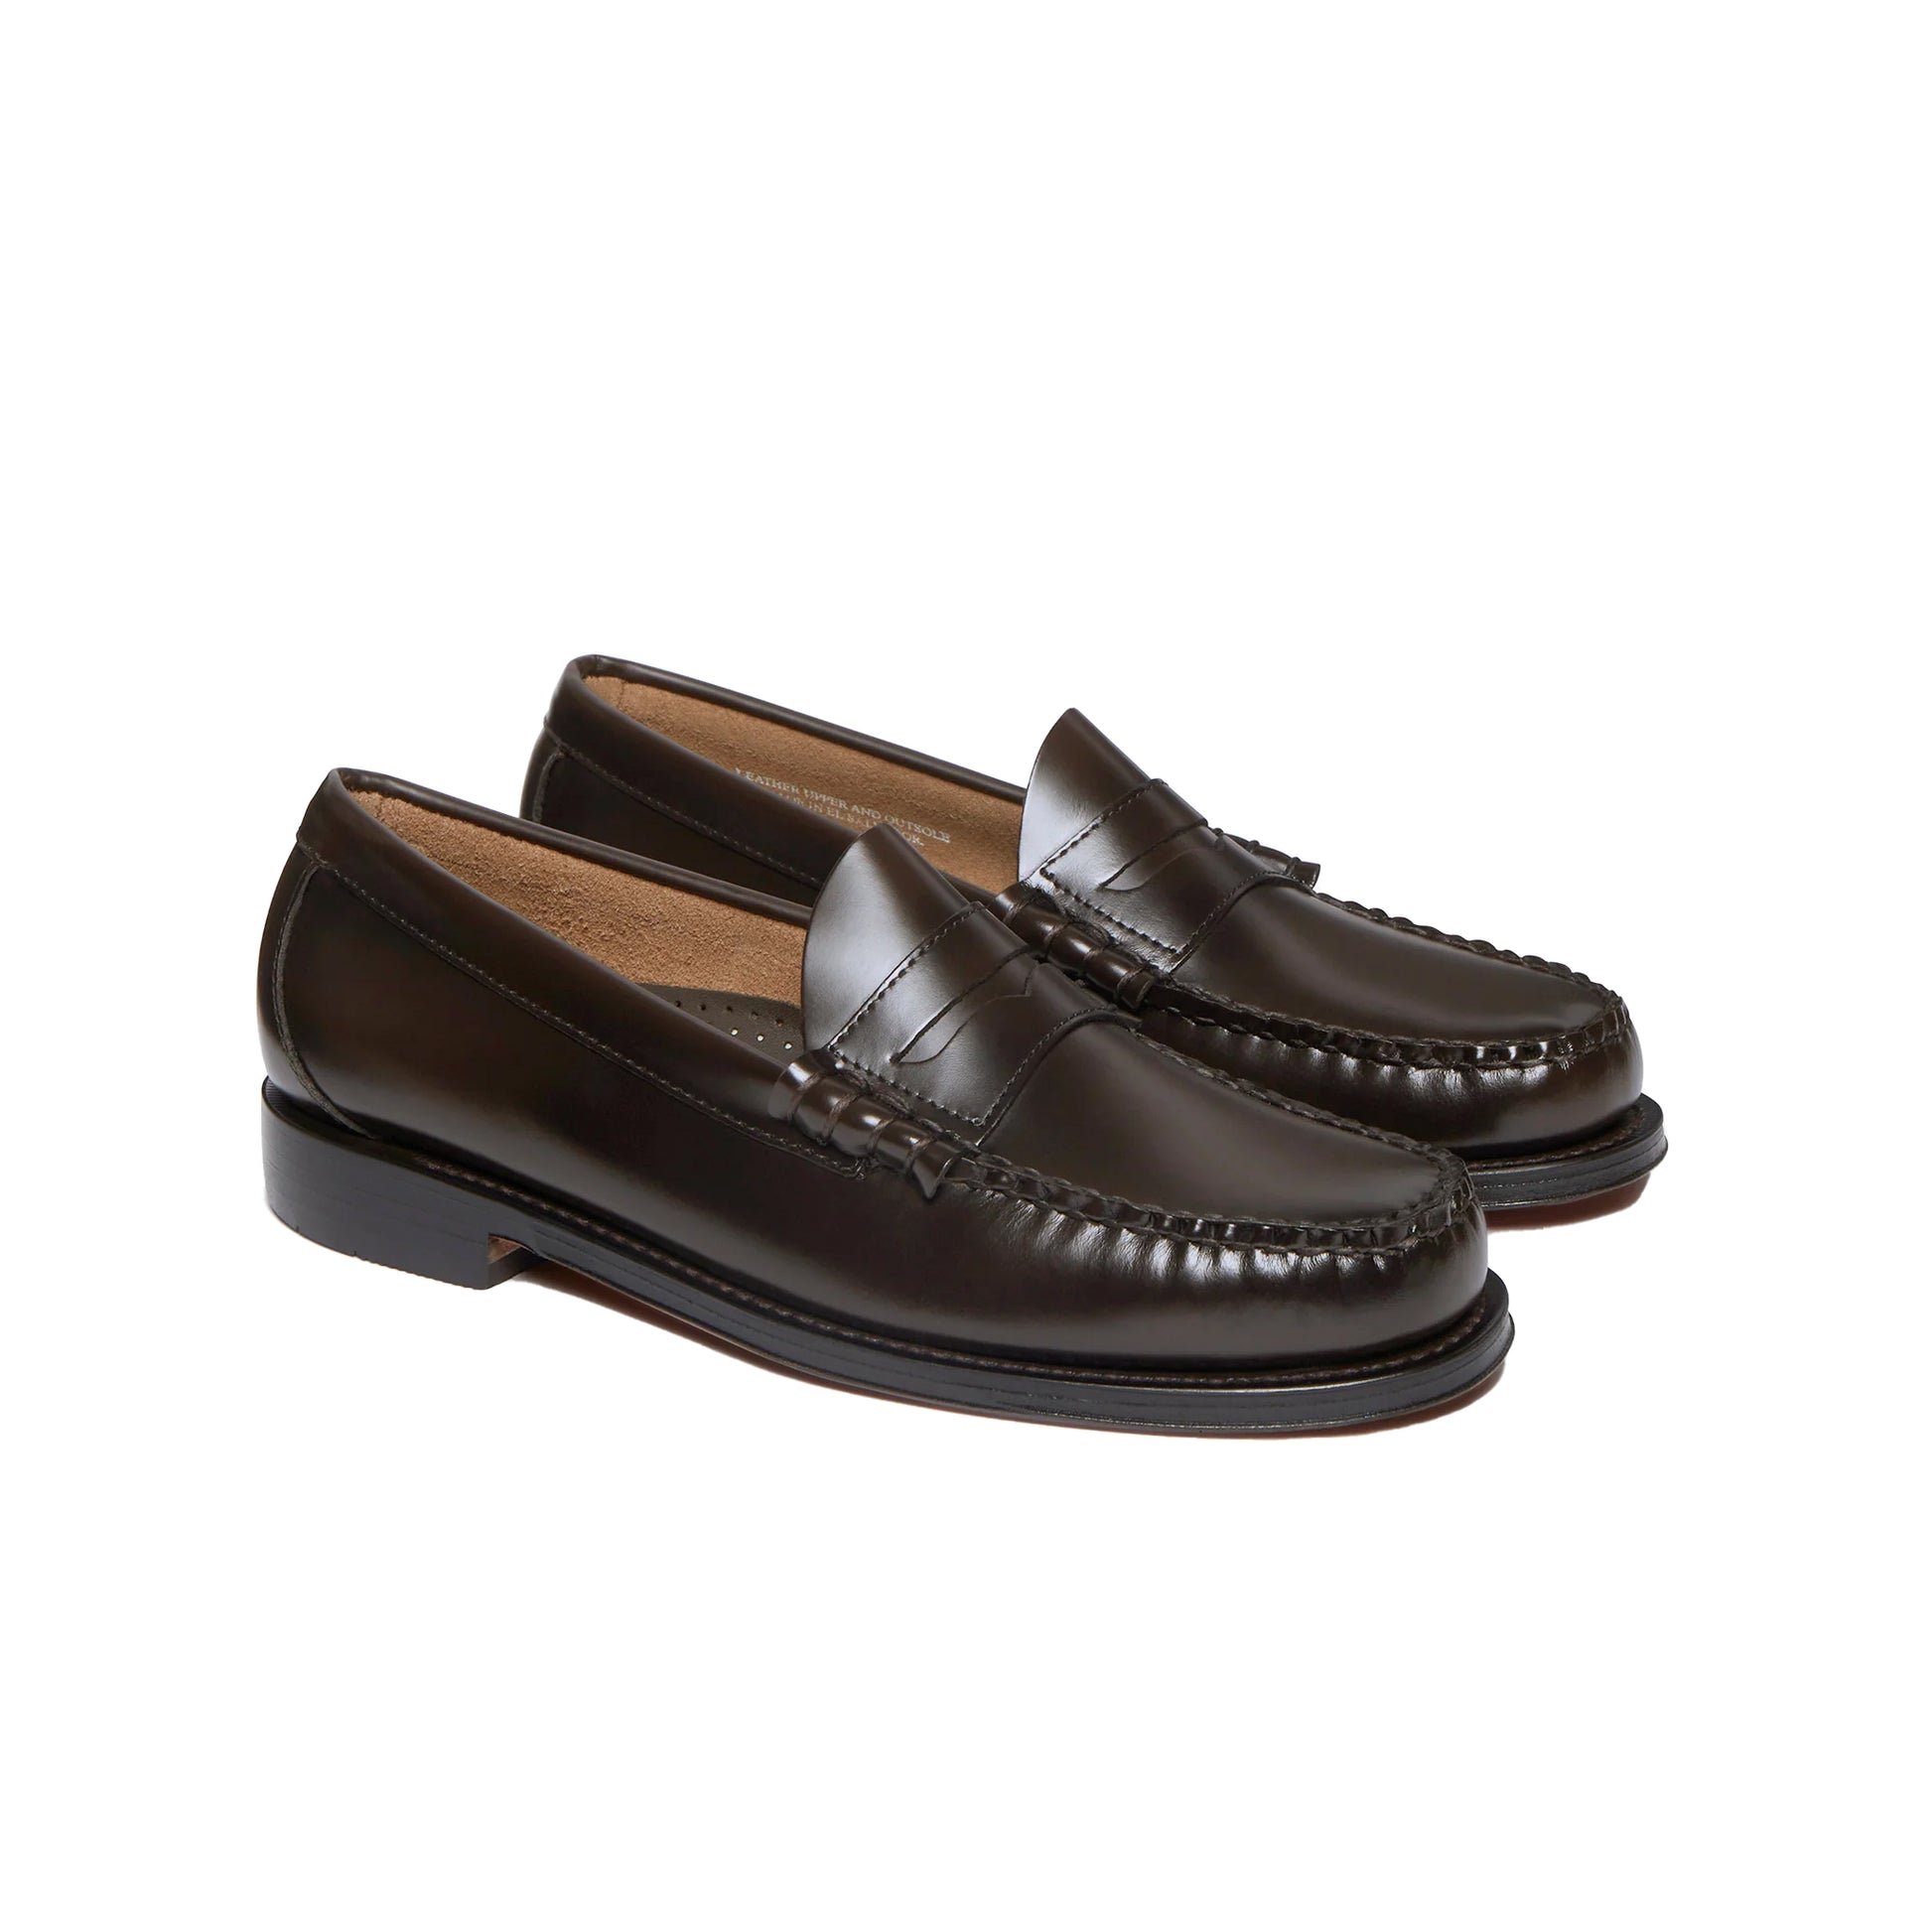 G.H.Bass Weejuns Larson Penny Loafer - Chocolate Pull Up Leather ...